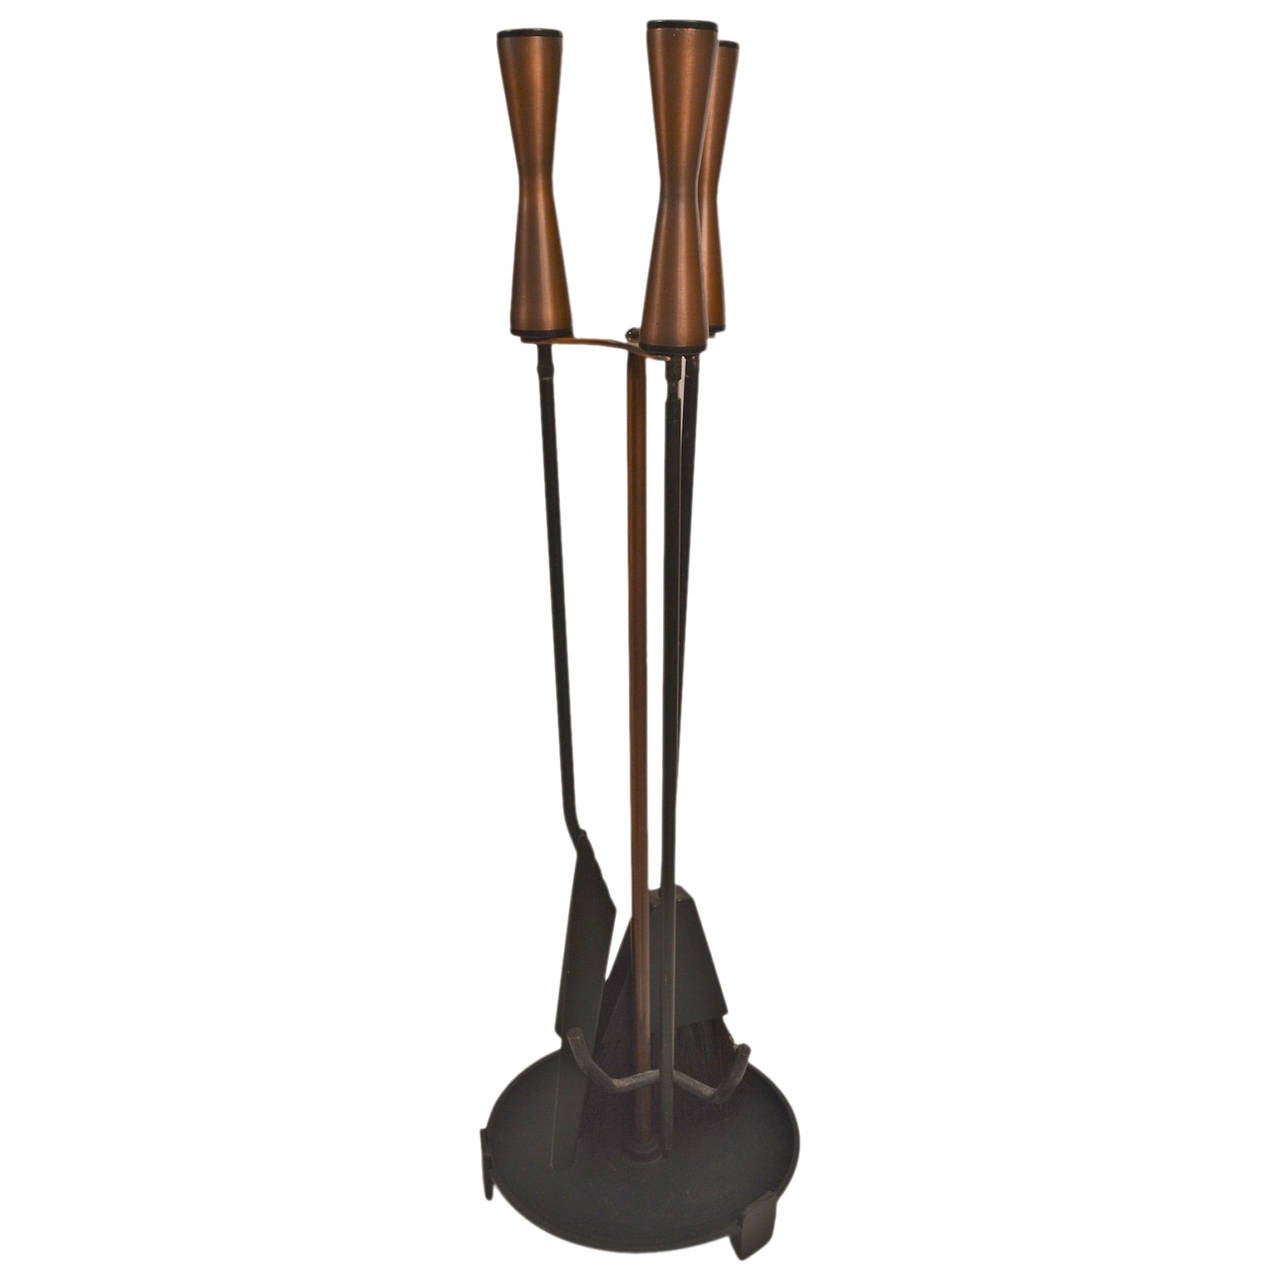 View this item and discover similar fireplace tools and chimney pots for sale at 1stdibs - Classic Mid-Century Modern fireplace tool set. This set includes a shovel